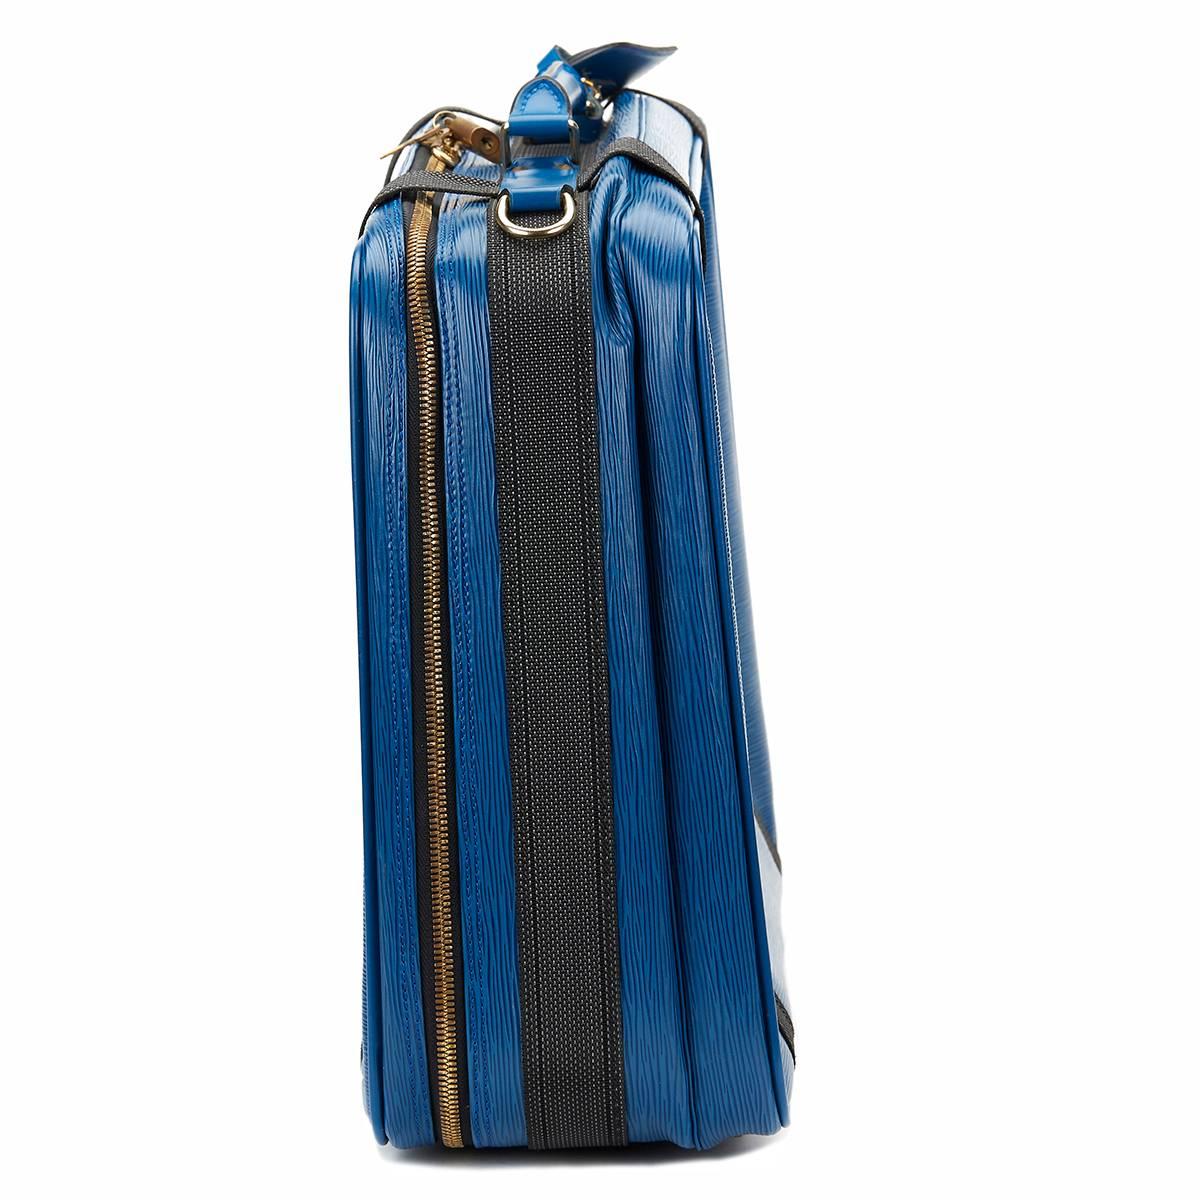 LOUIS VUITTON
Blue Epi Leather Vintage Satellite 50

This LOUIS VUITTON Satellite 50 is in Excellent Pre-Owned Condition accompanied by Louis Vuitton Dust Bag, Padlock, Keys, Shoulder Strap. Circa 1990. Primarily made from Epi Leather complimented